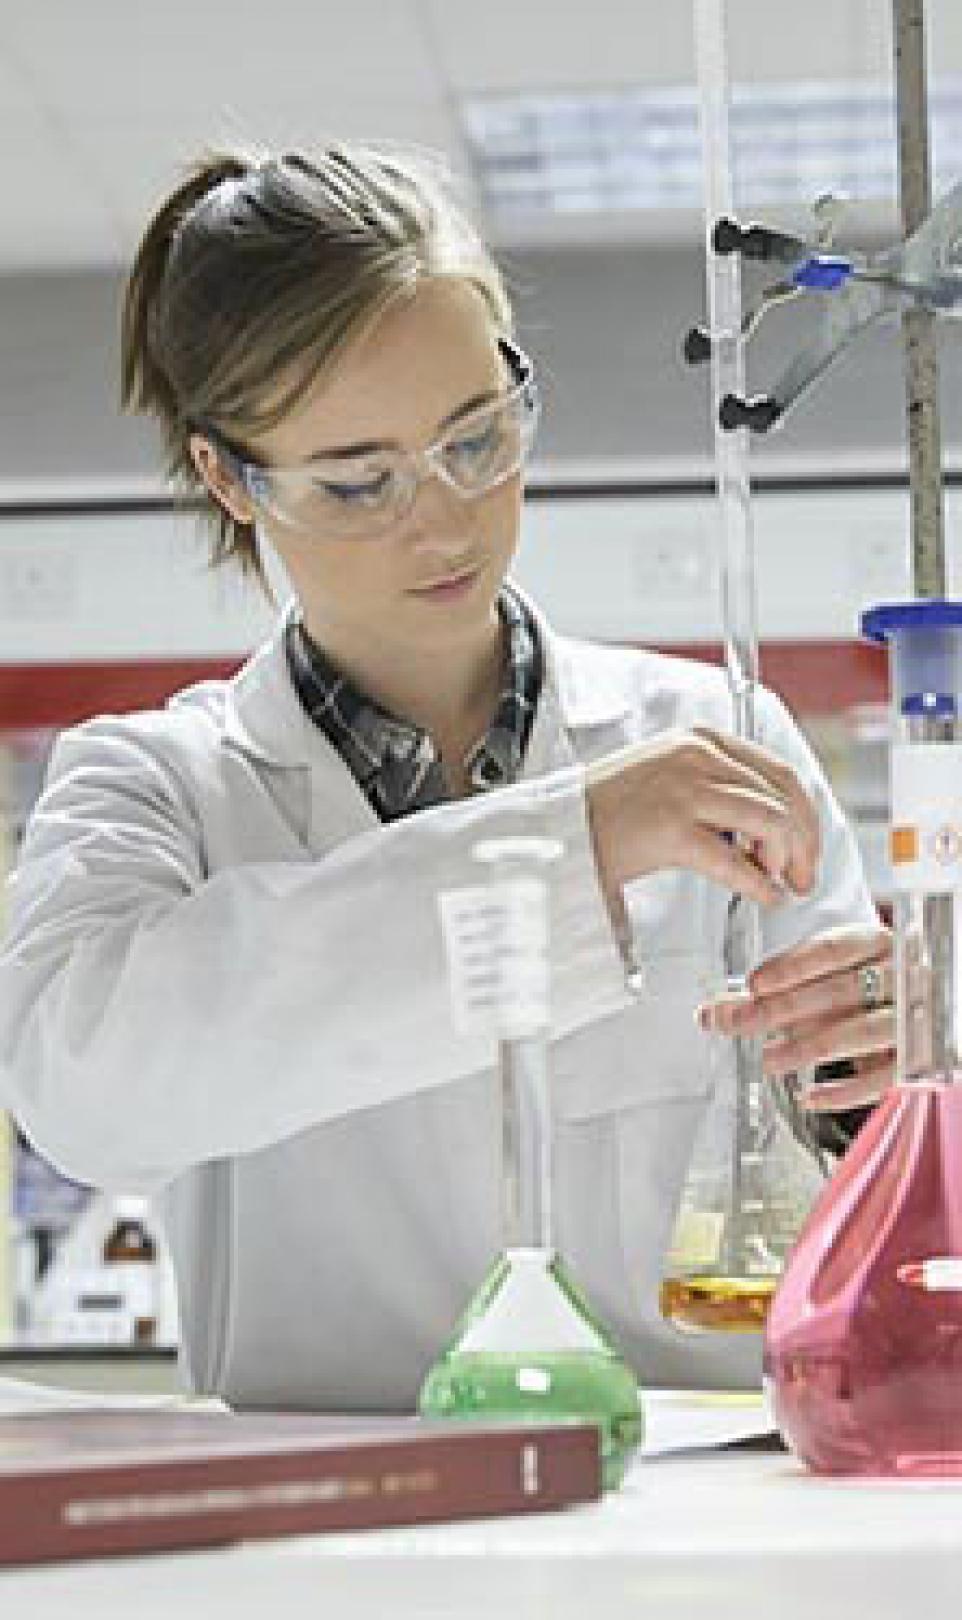 A female Walgreens technician in a white lab coat, pictured working in a laboratory